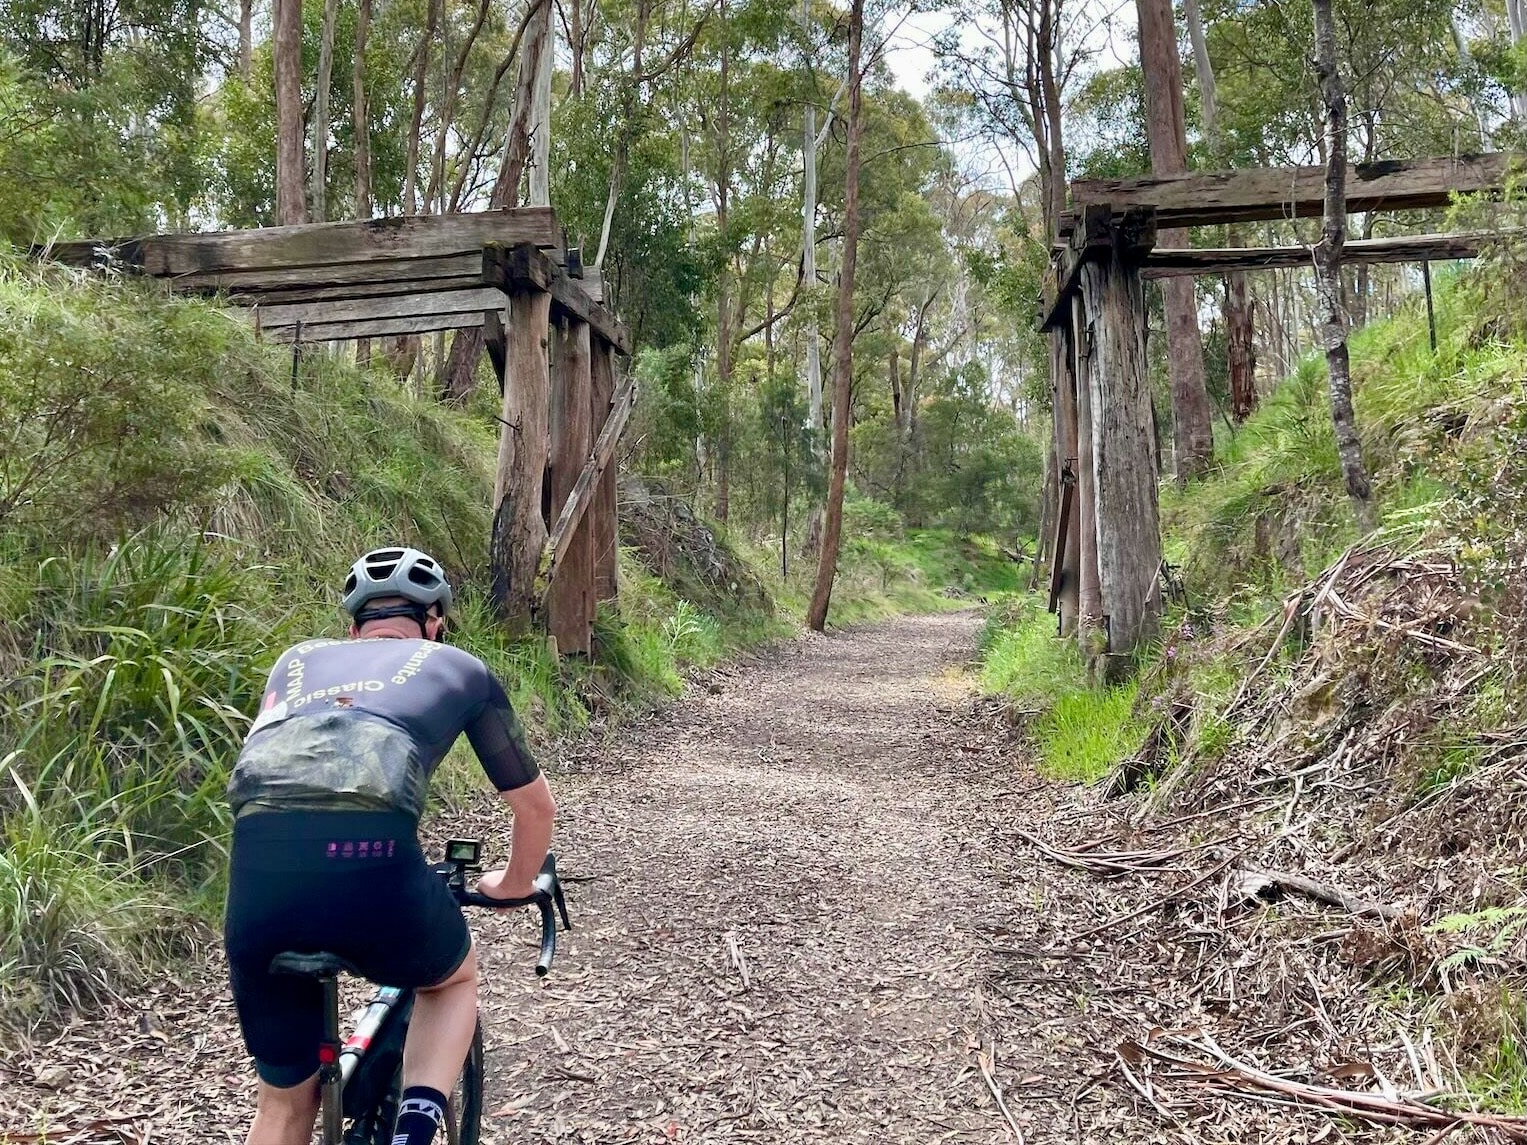 Cyclist riding on smooth gravel road with a unused timber railway bridge and native bushland in the background